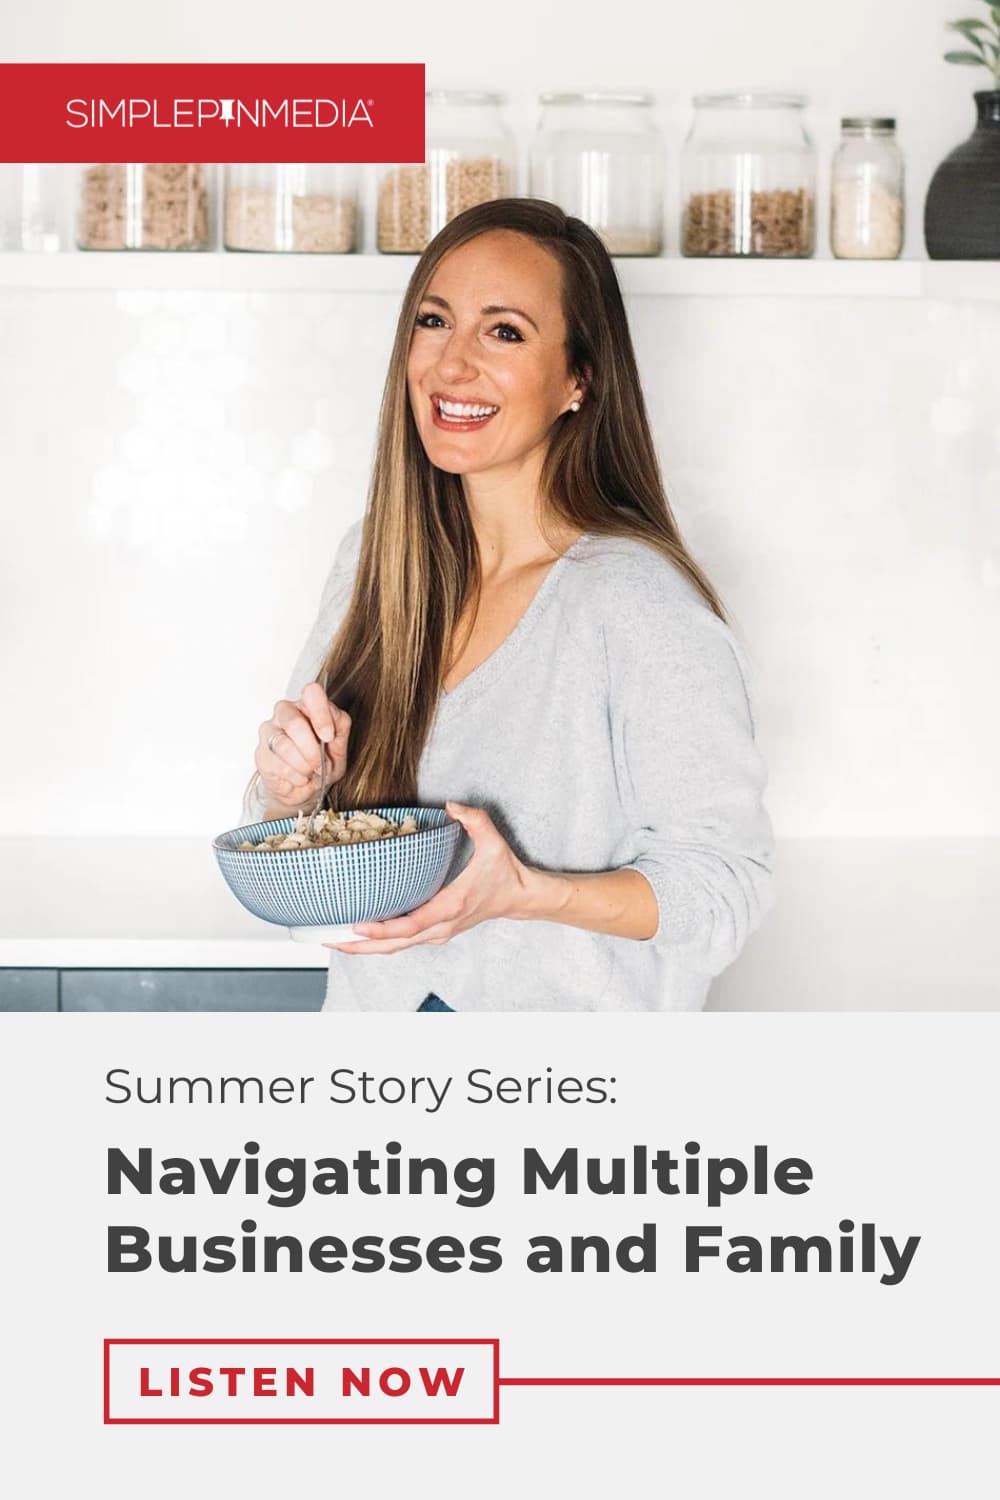 woman stirring food in bowl with text "summer story series: navigating multiple businesses and family".